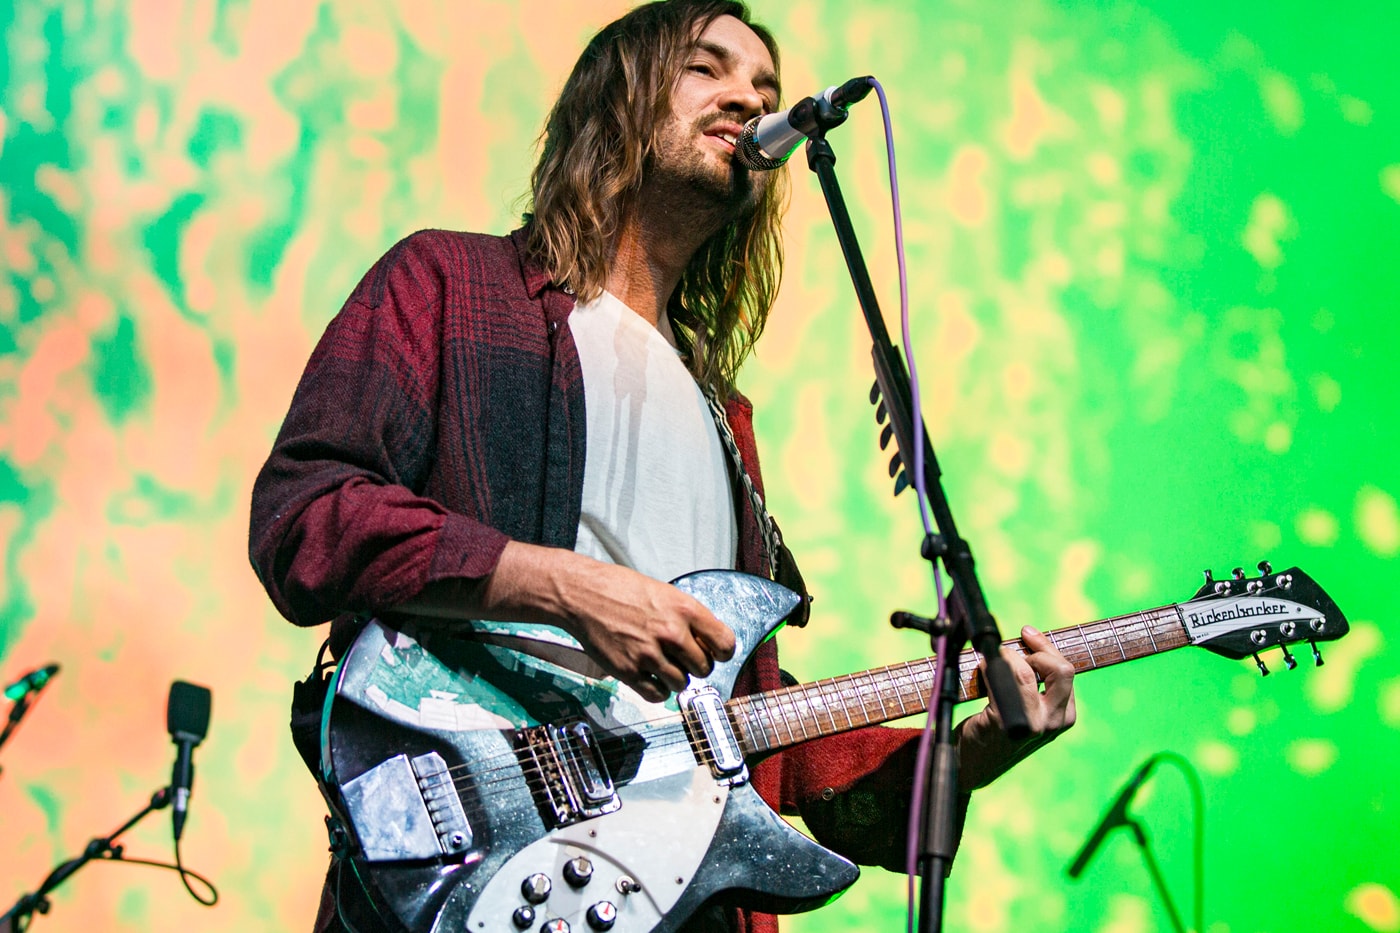 watch new live tame impala kevin parker theophilus london song music video 2018 october Peppermint Club West Hollywood theo collab collaboration